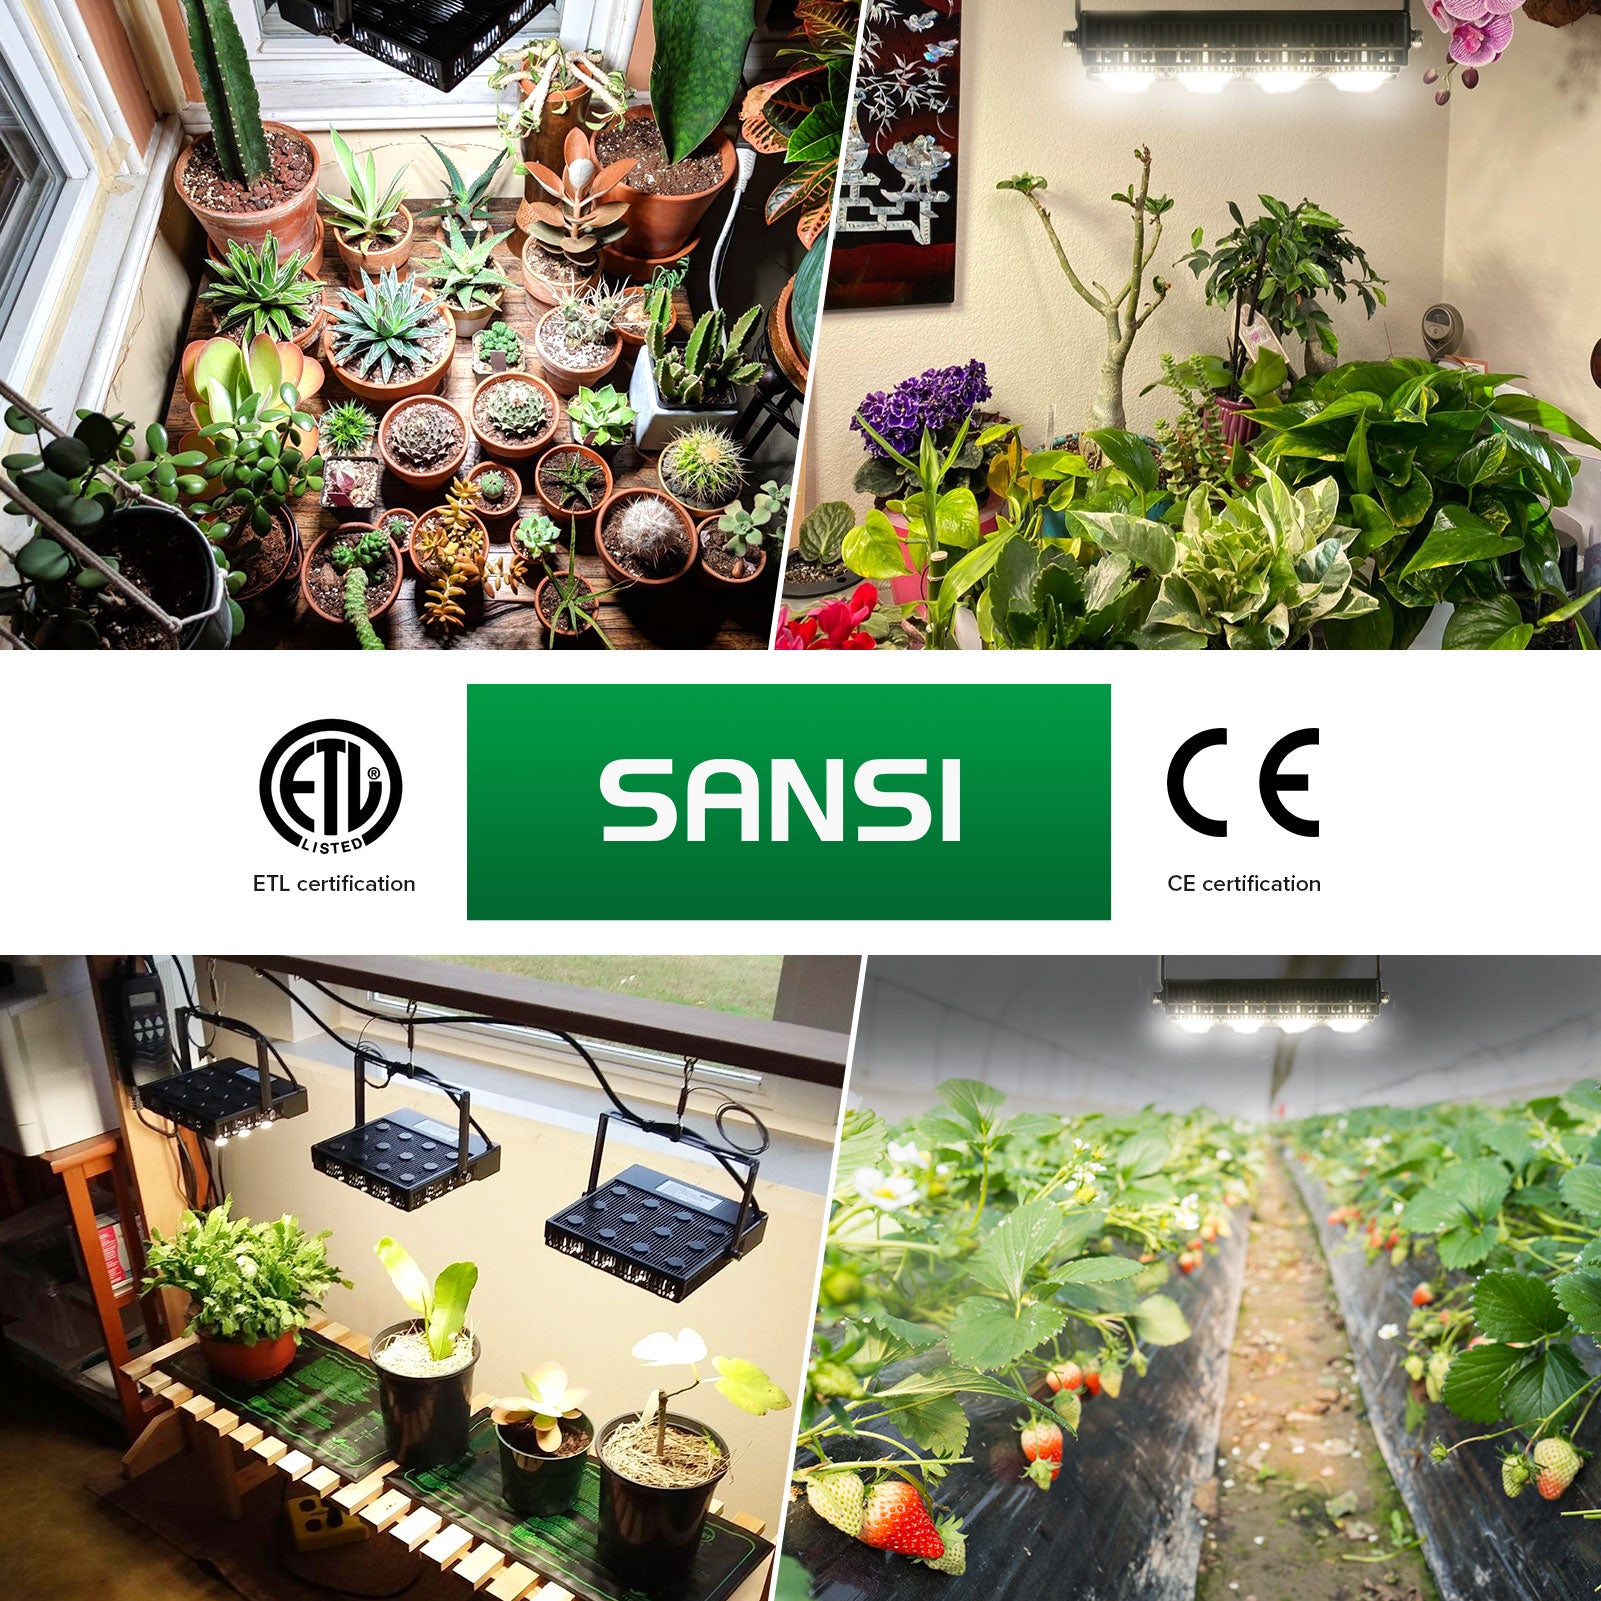 45W LED Grow Light for indoorplanting has ELT and CE certification